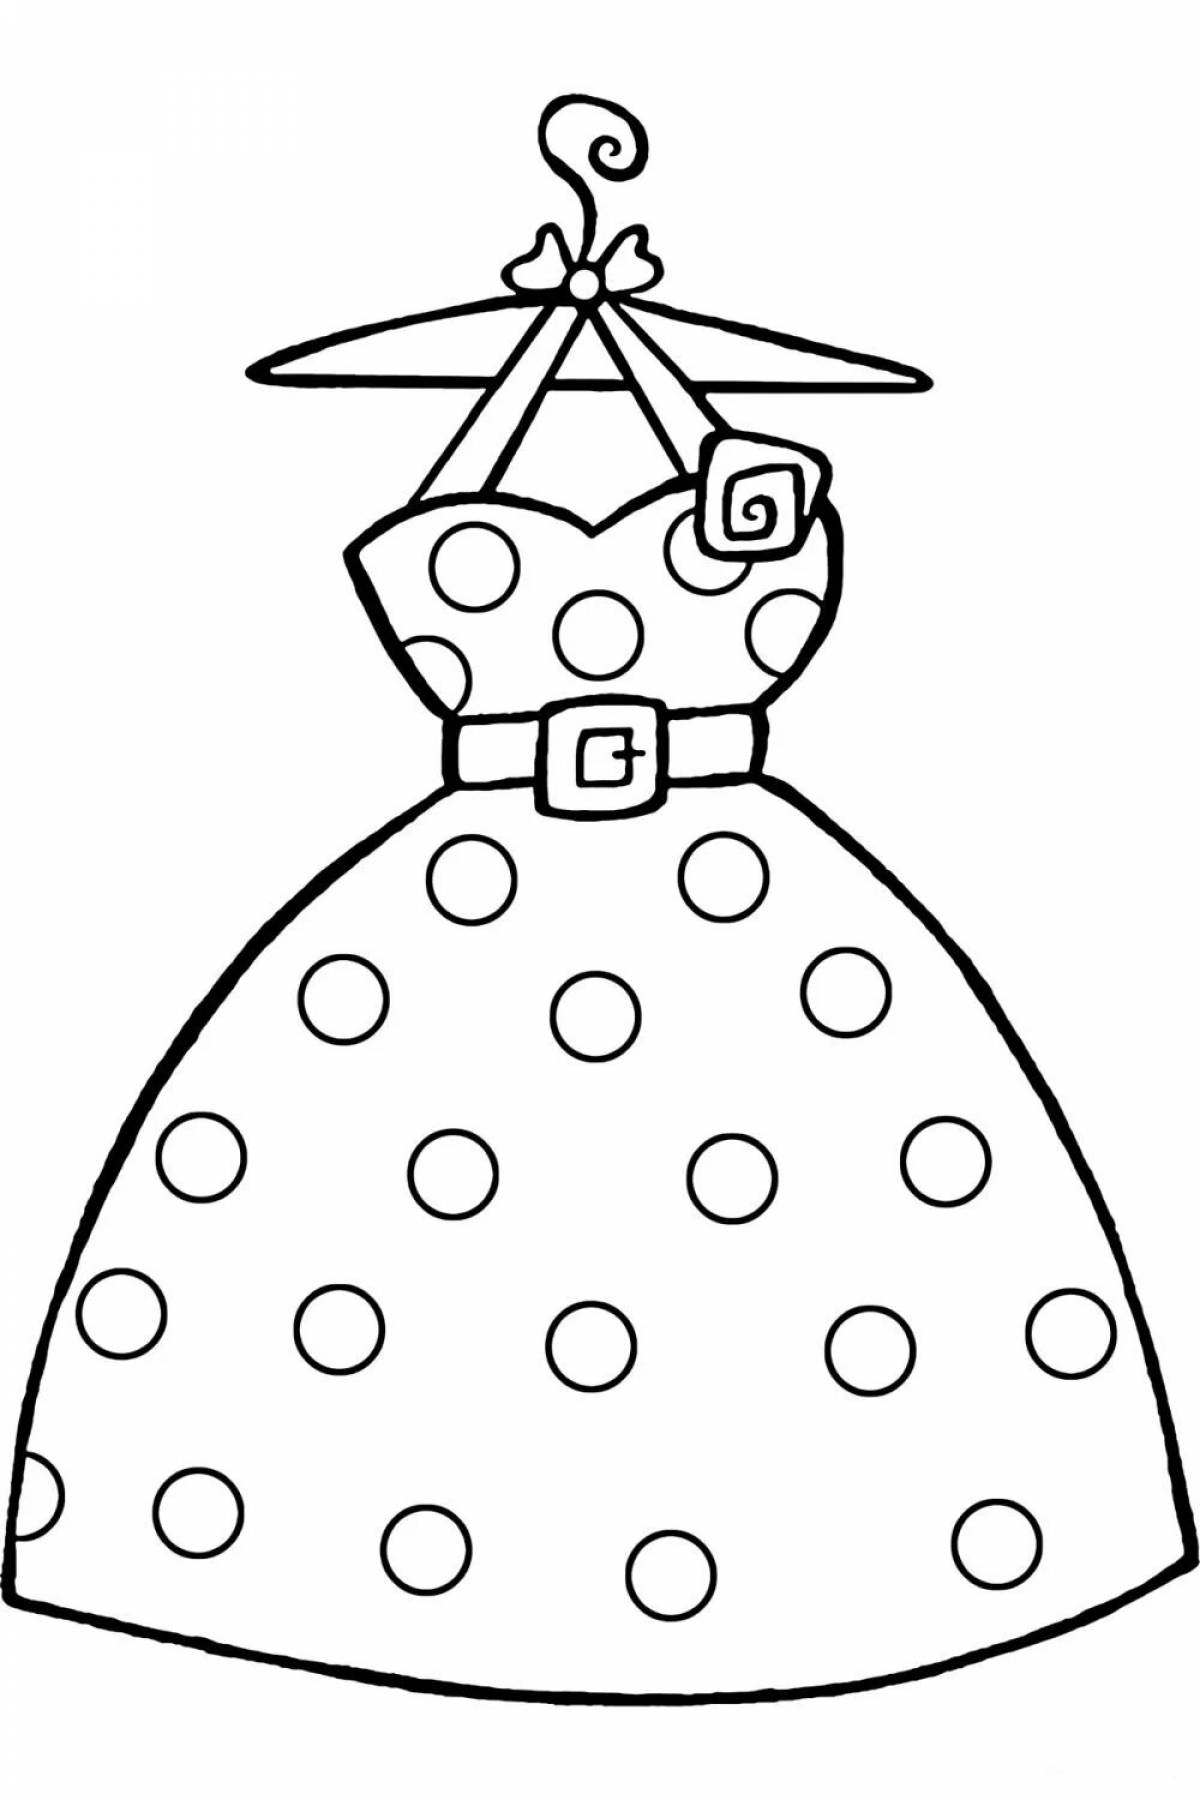 Shimmery dress coloring page for kids